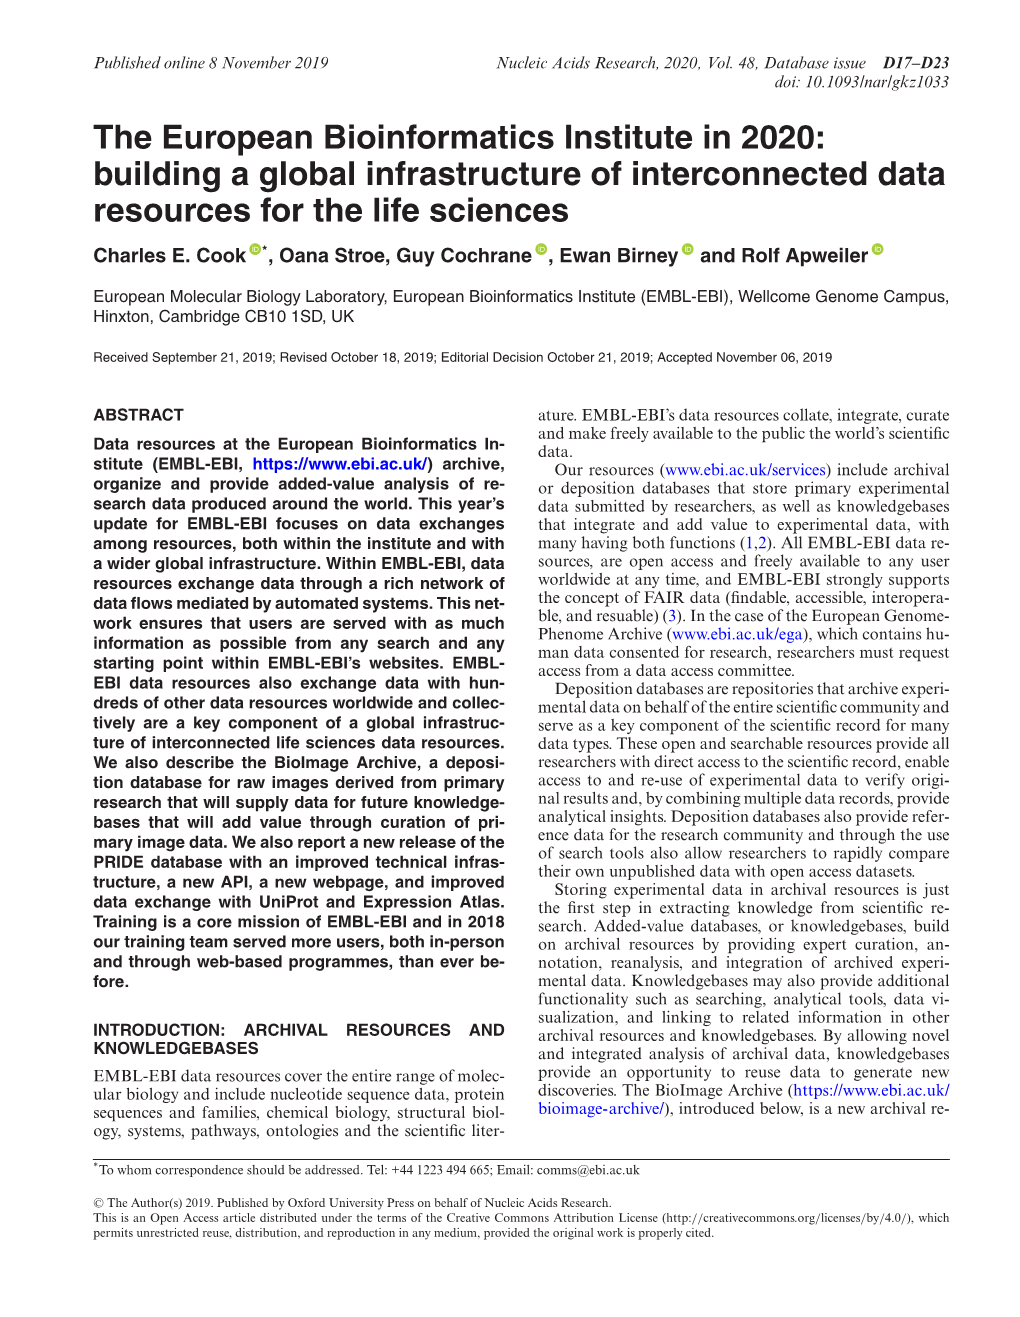 The European Bioinformatics Institute in 2020: Building a Global Infrastructure of Interconnected Data Resources for the Life Sciences Charles E